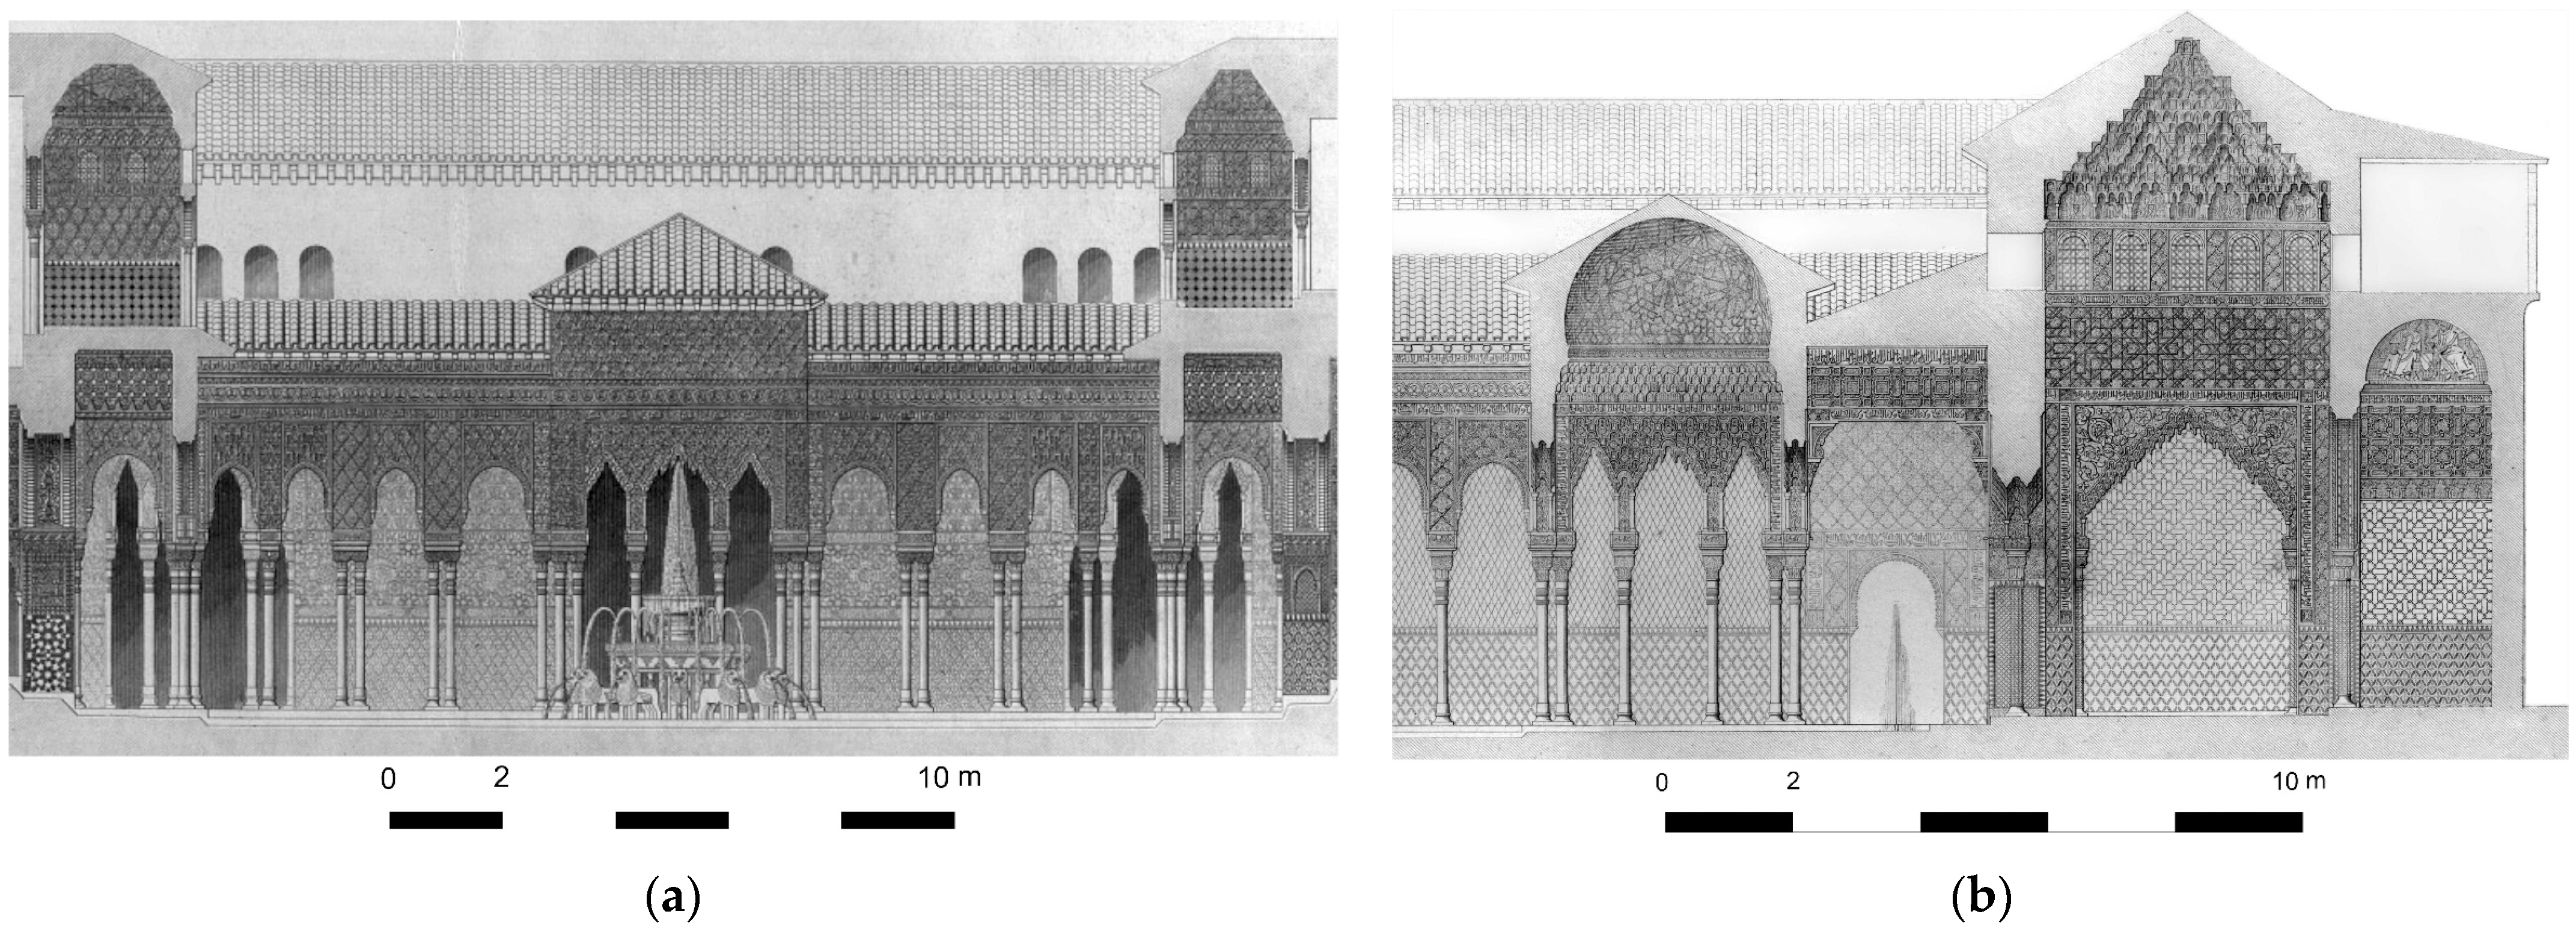 Plans, elevations, sections, and details of the Alhambra, vol. 1 - Special  Collections Books - Digital Collections